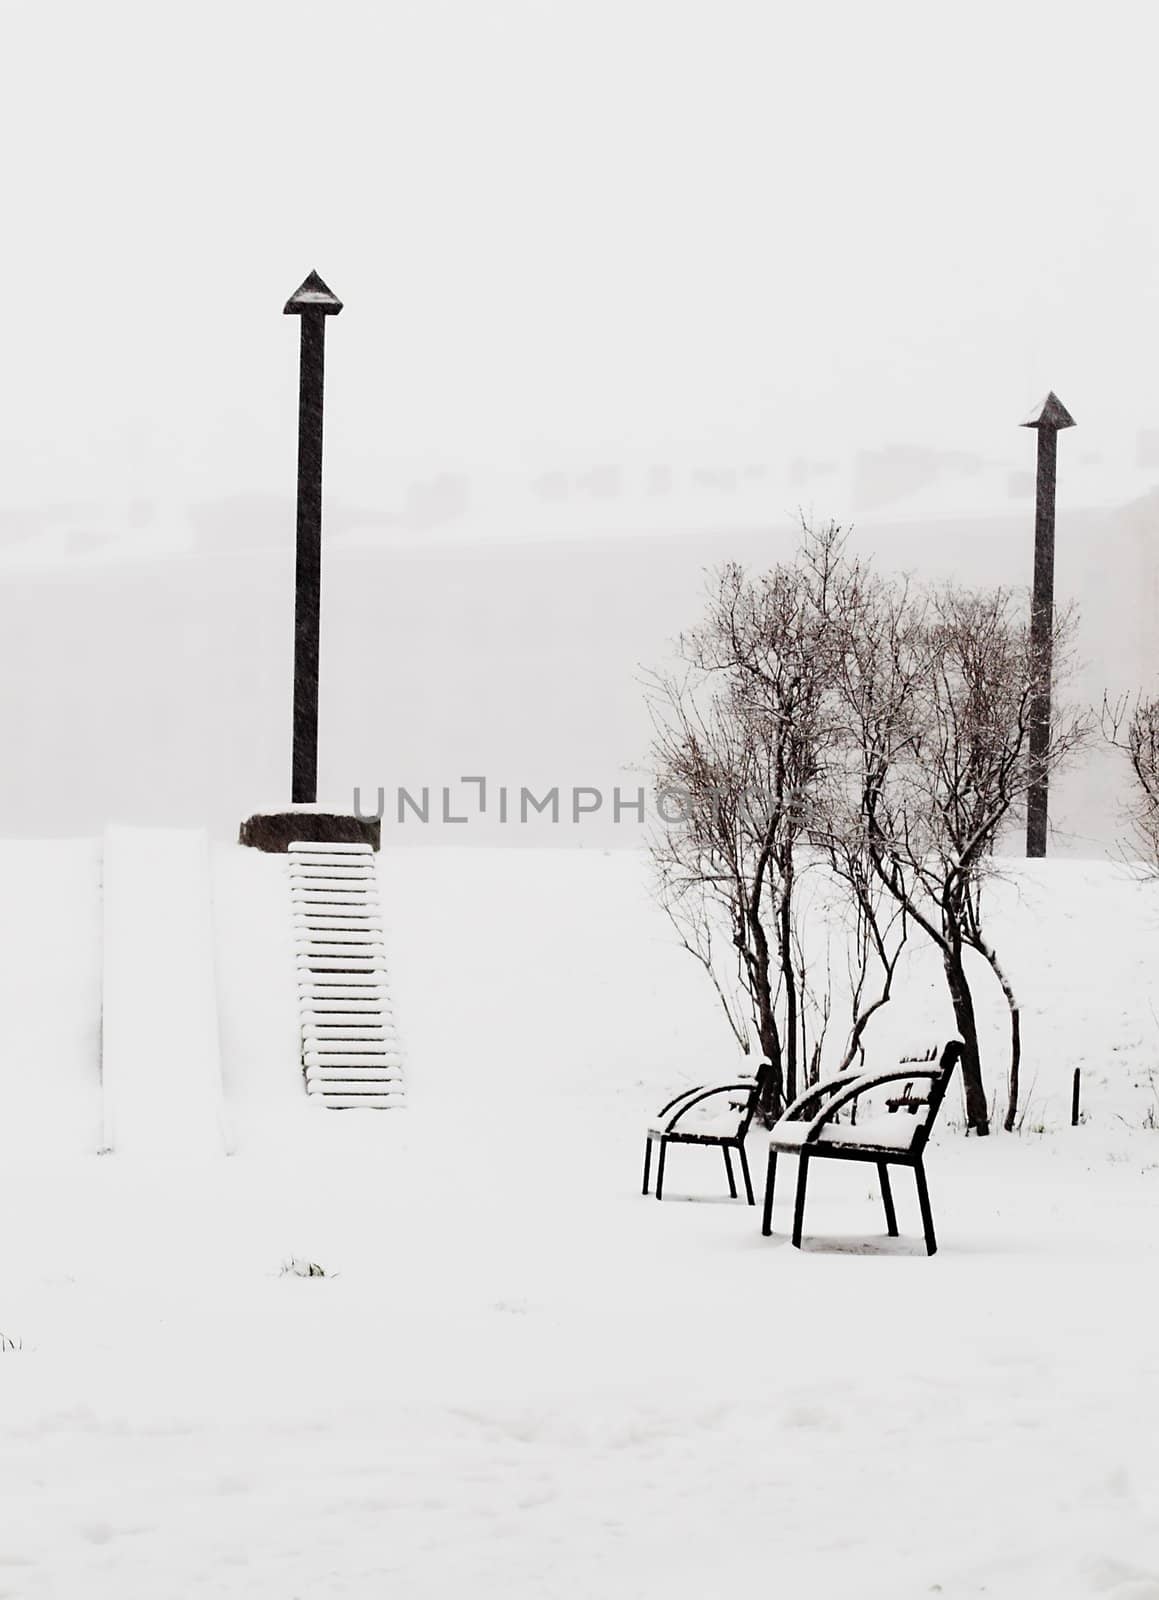 Benches at a back alley while snowing heavily.